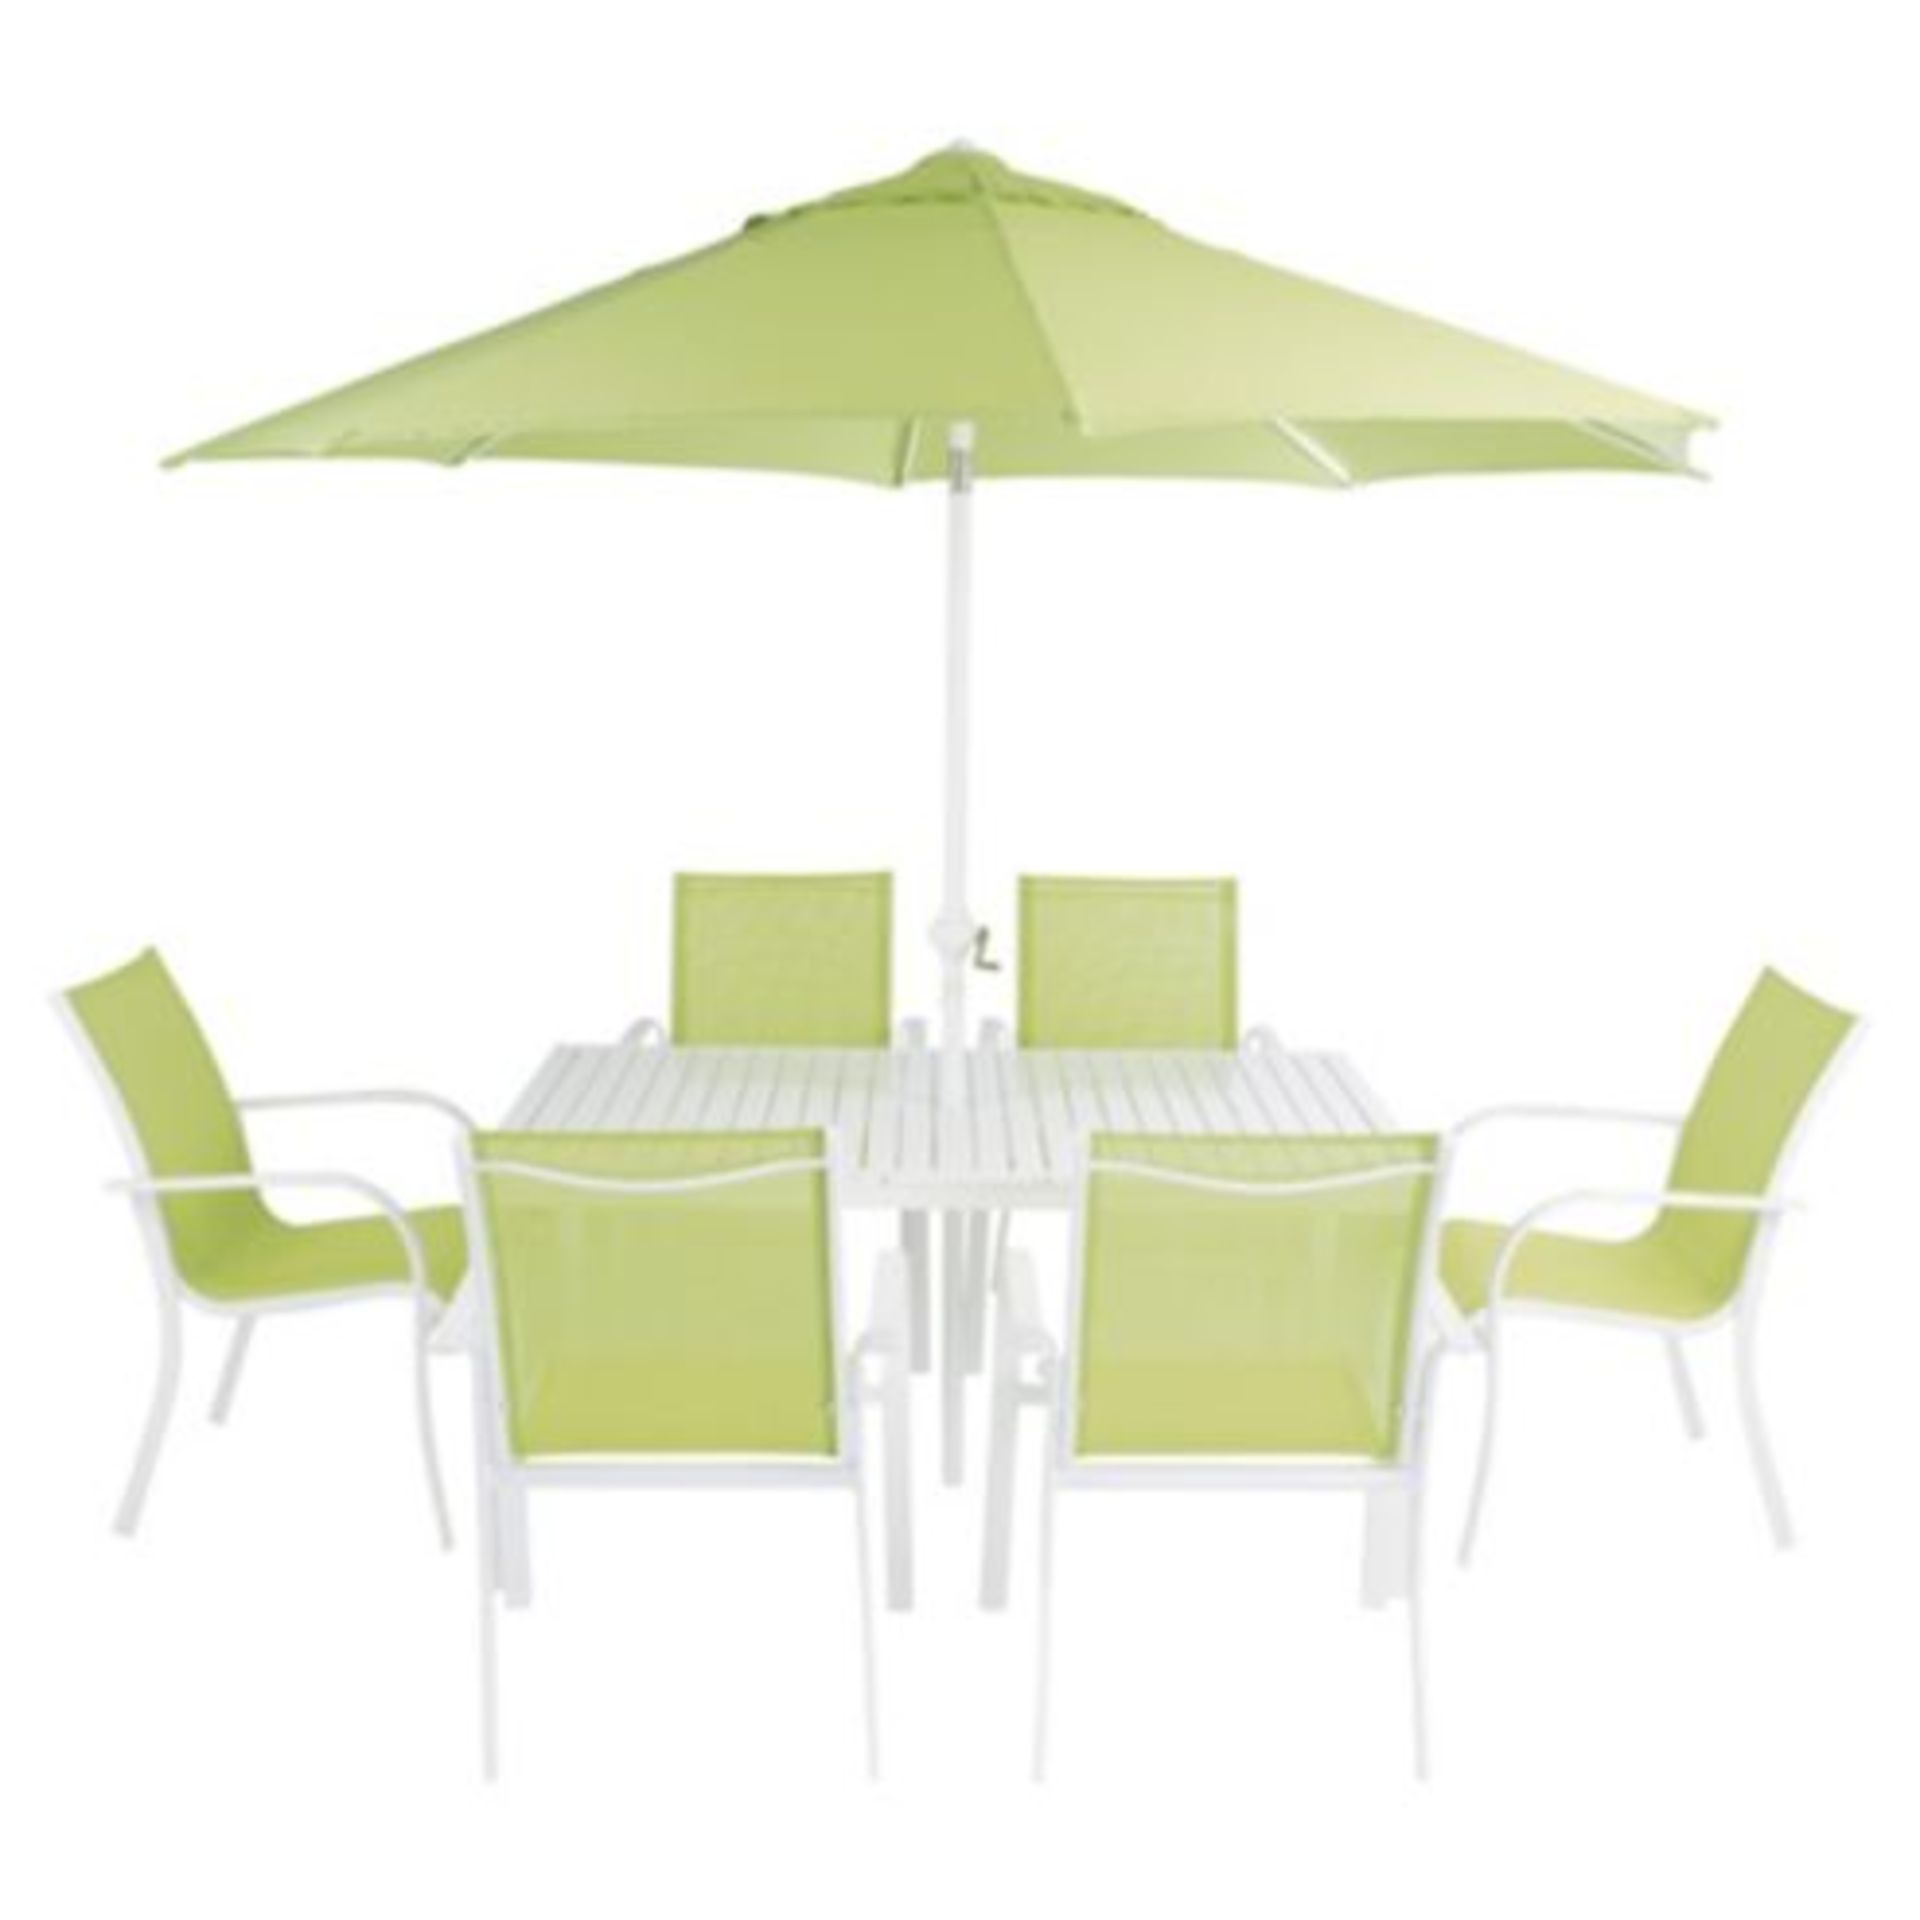 V Brand New 8 Piece Powder Coated Steel Garden Furniture Set Includes 6 Chairs - Table and Parasol -